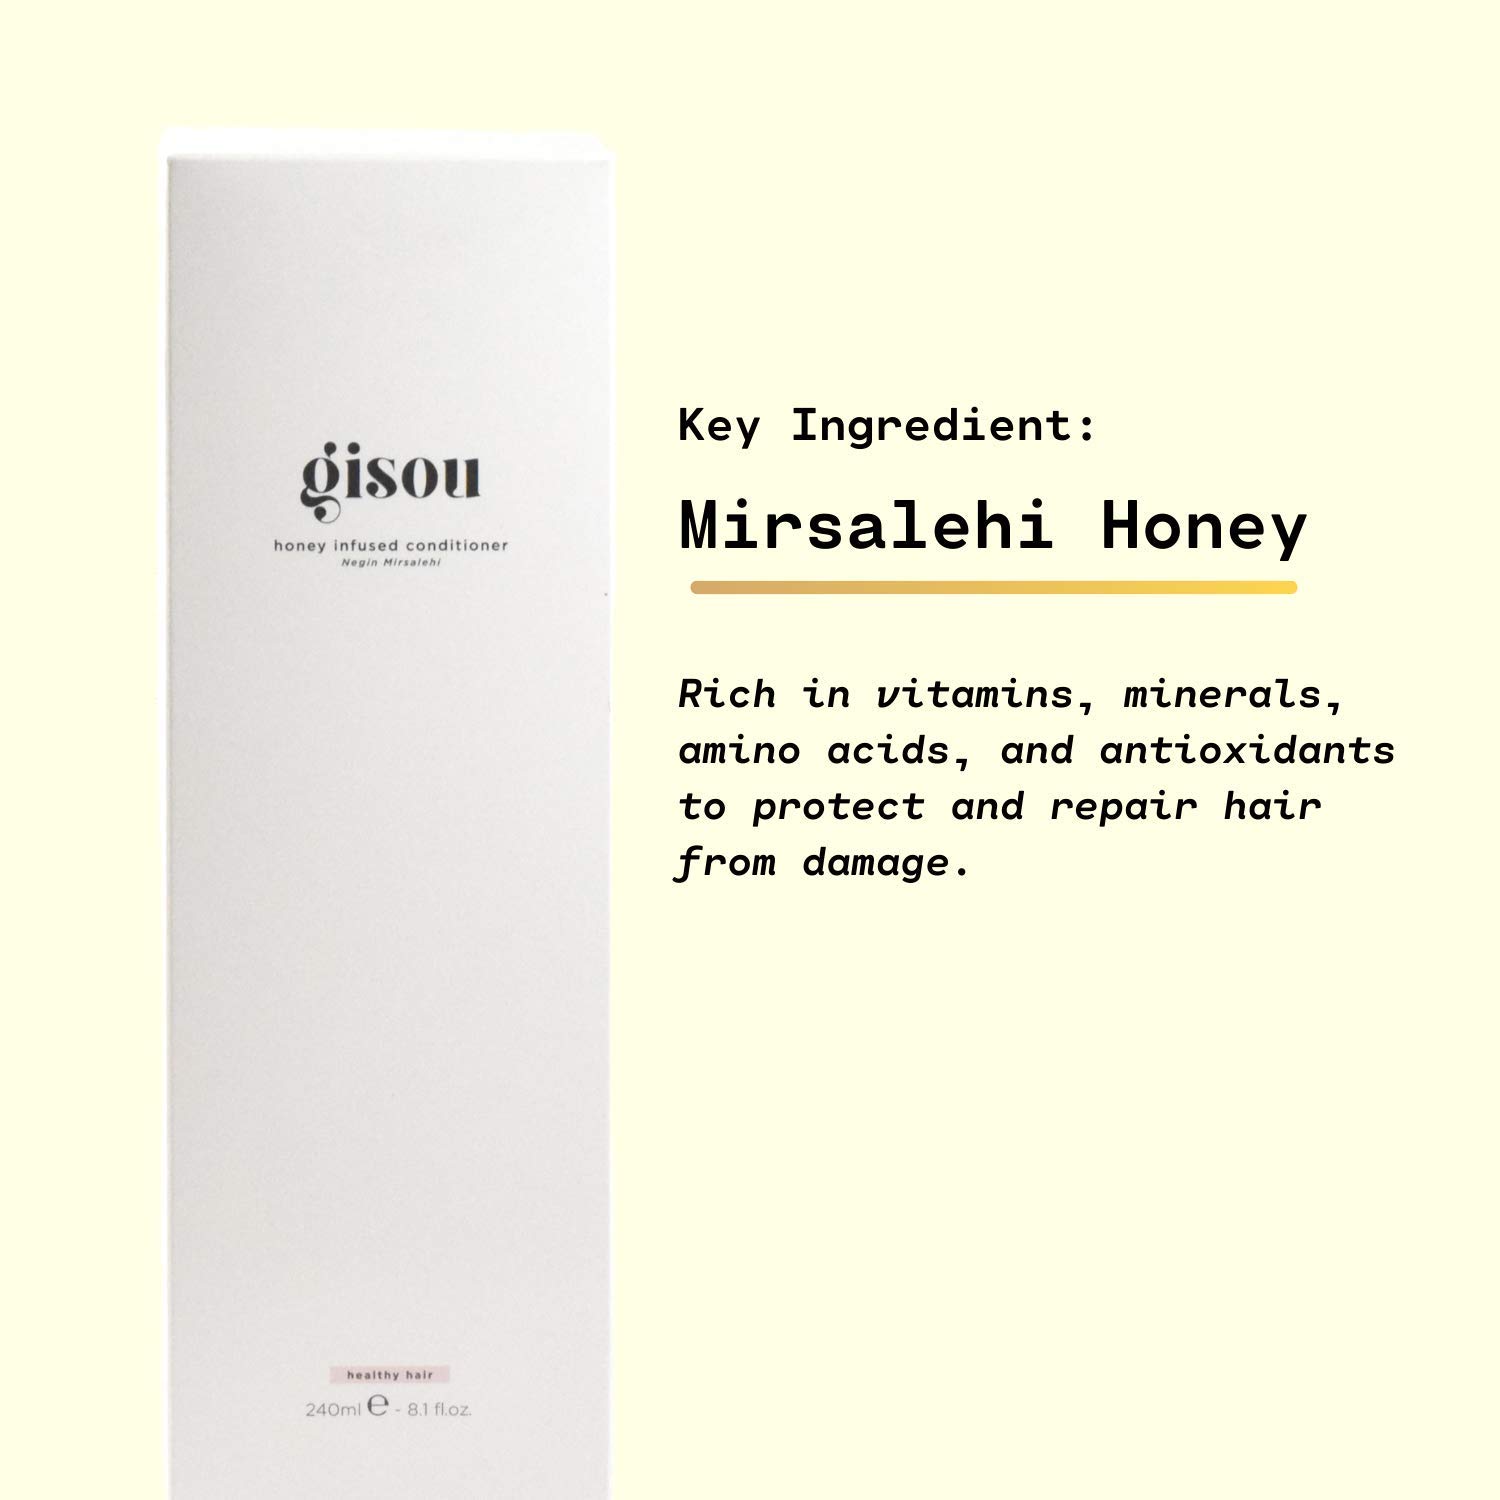 Gisou Honey Infused Hair Conditioner - 240 ml-2